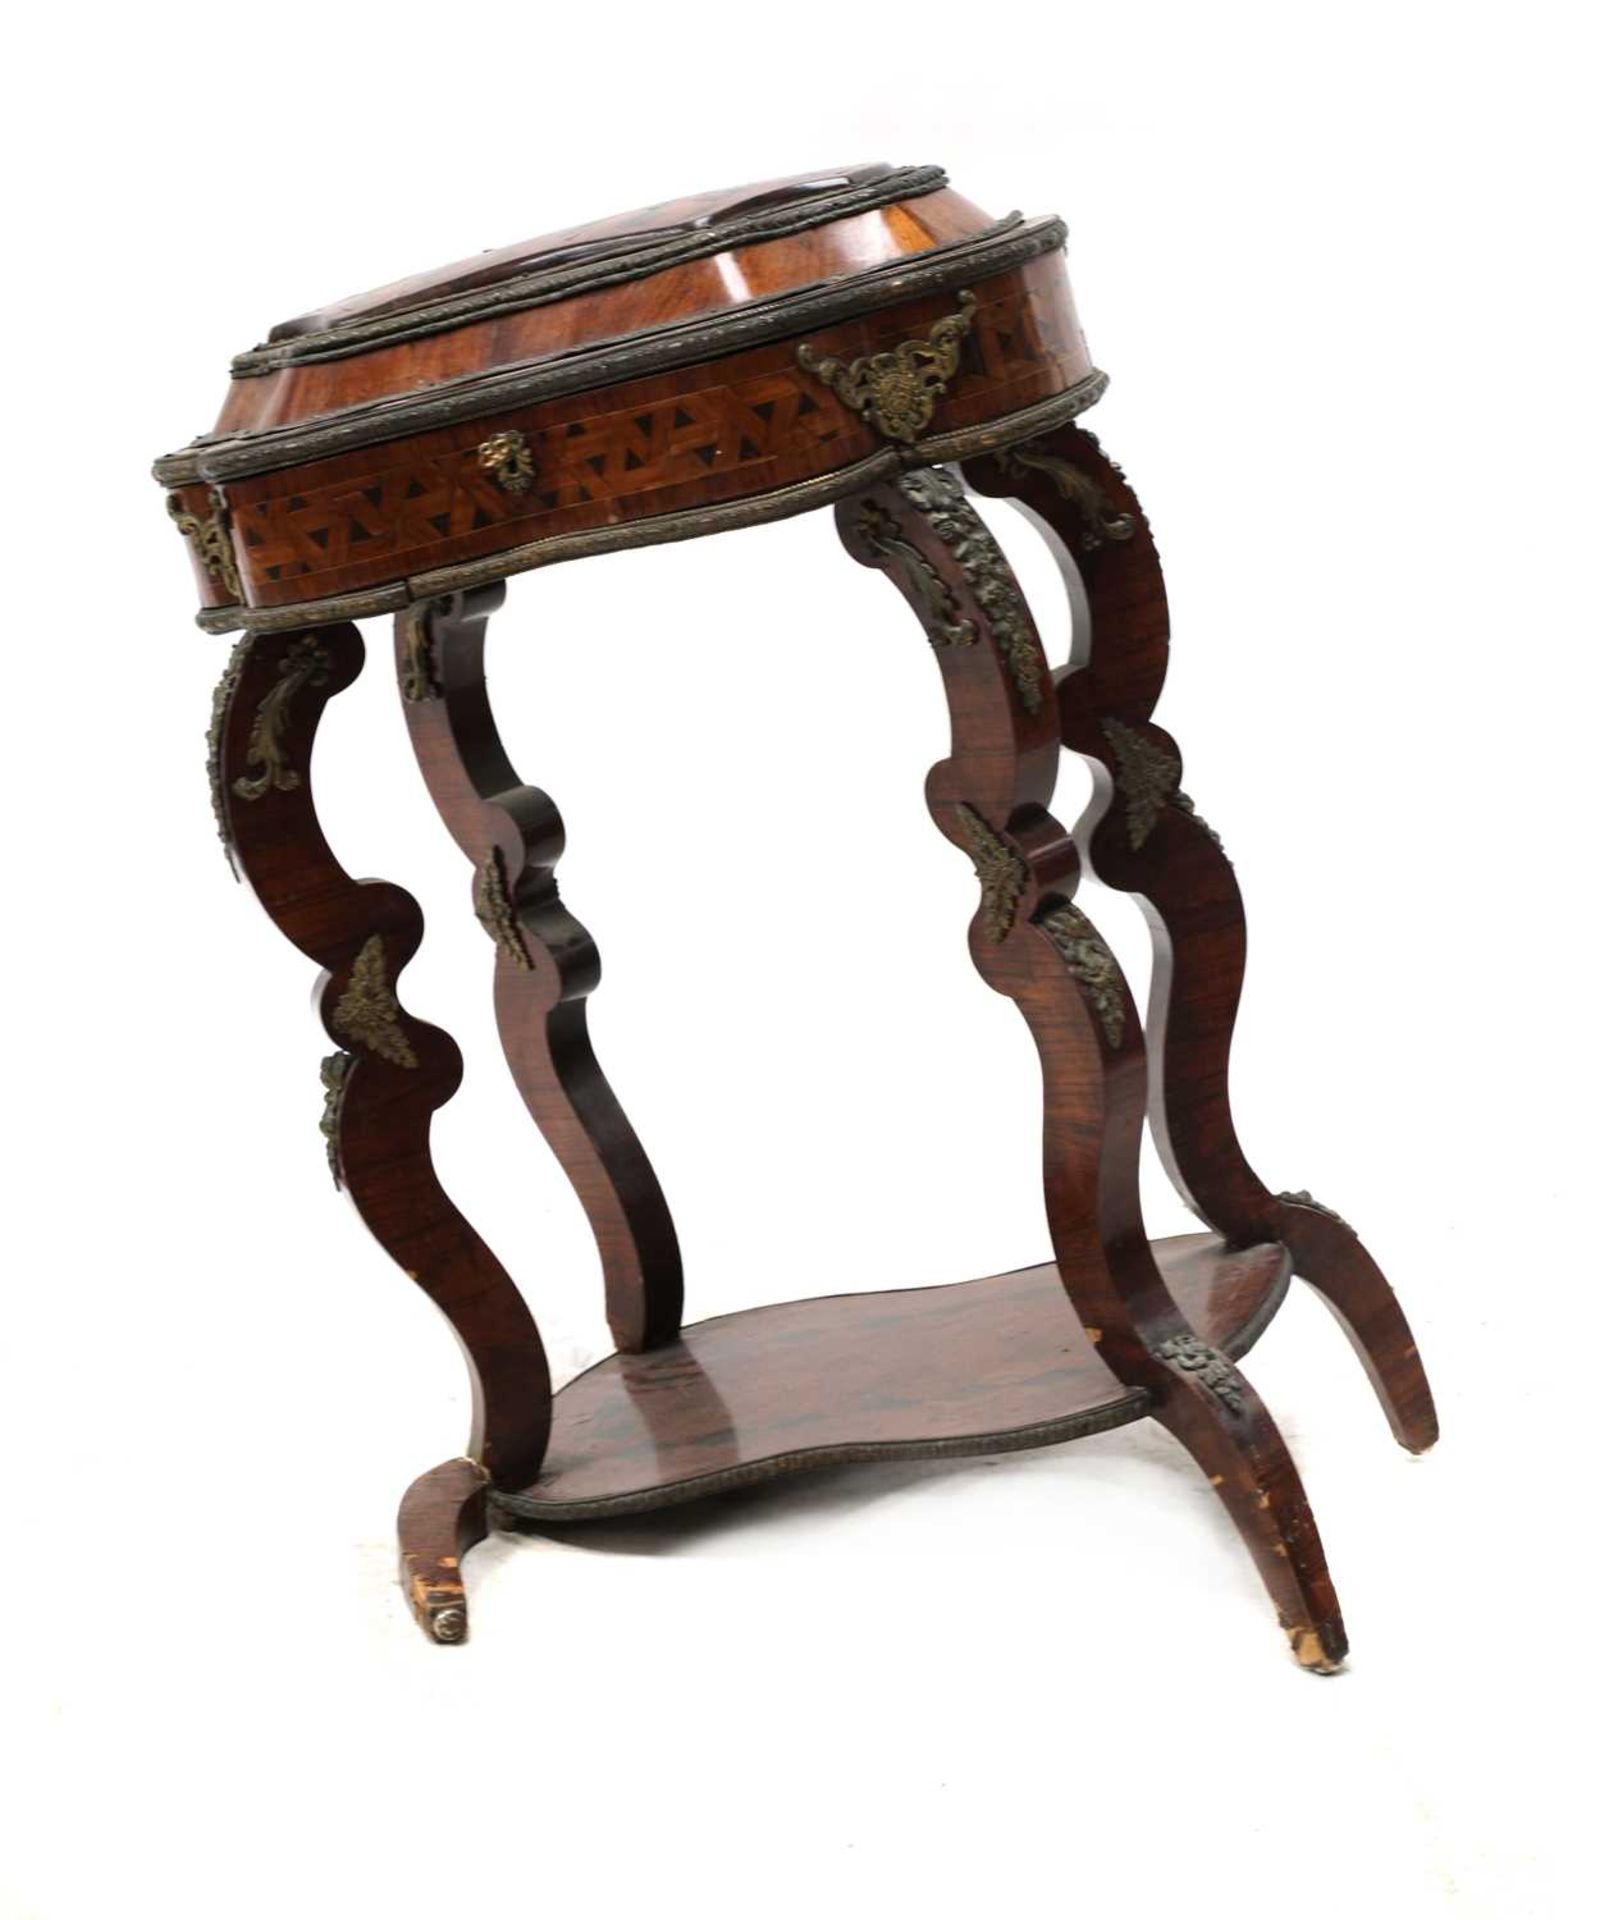 A late 19th century French kingwood and parquetry inlaid sewing table,